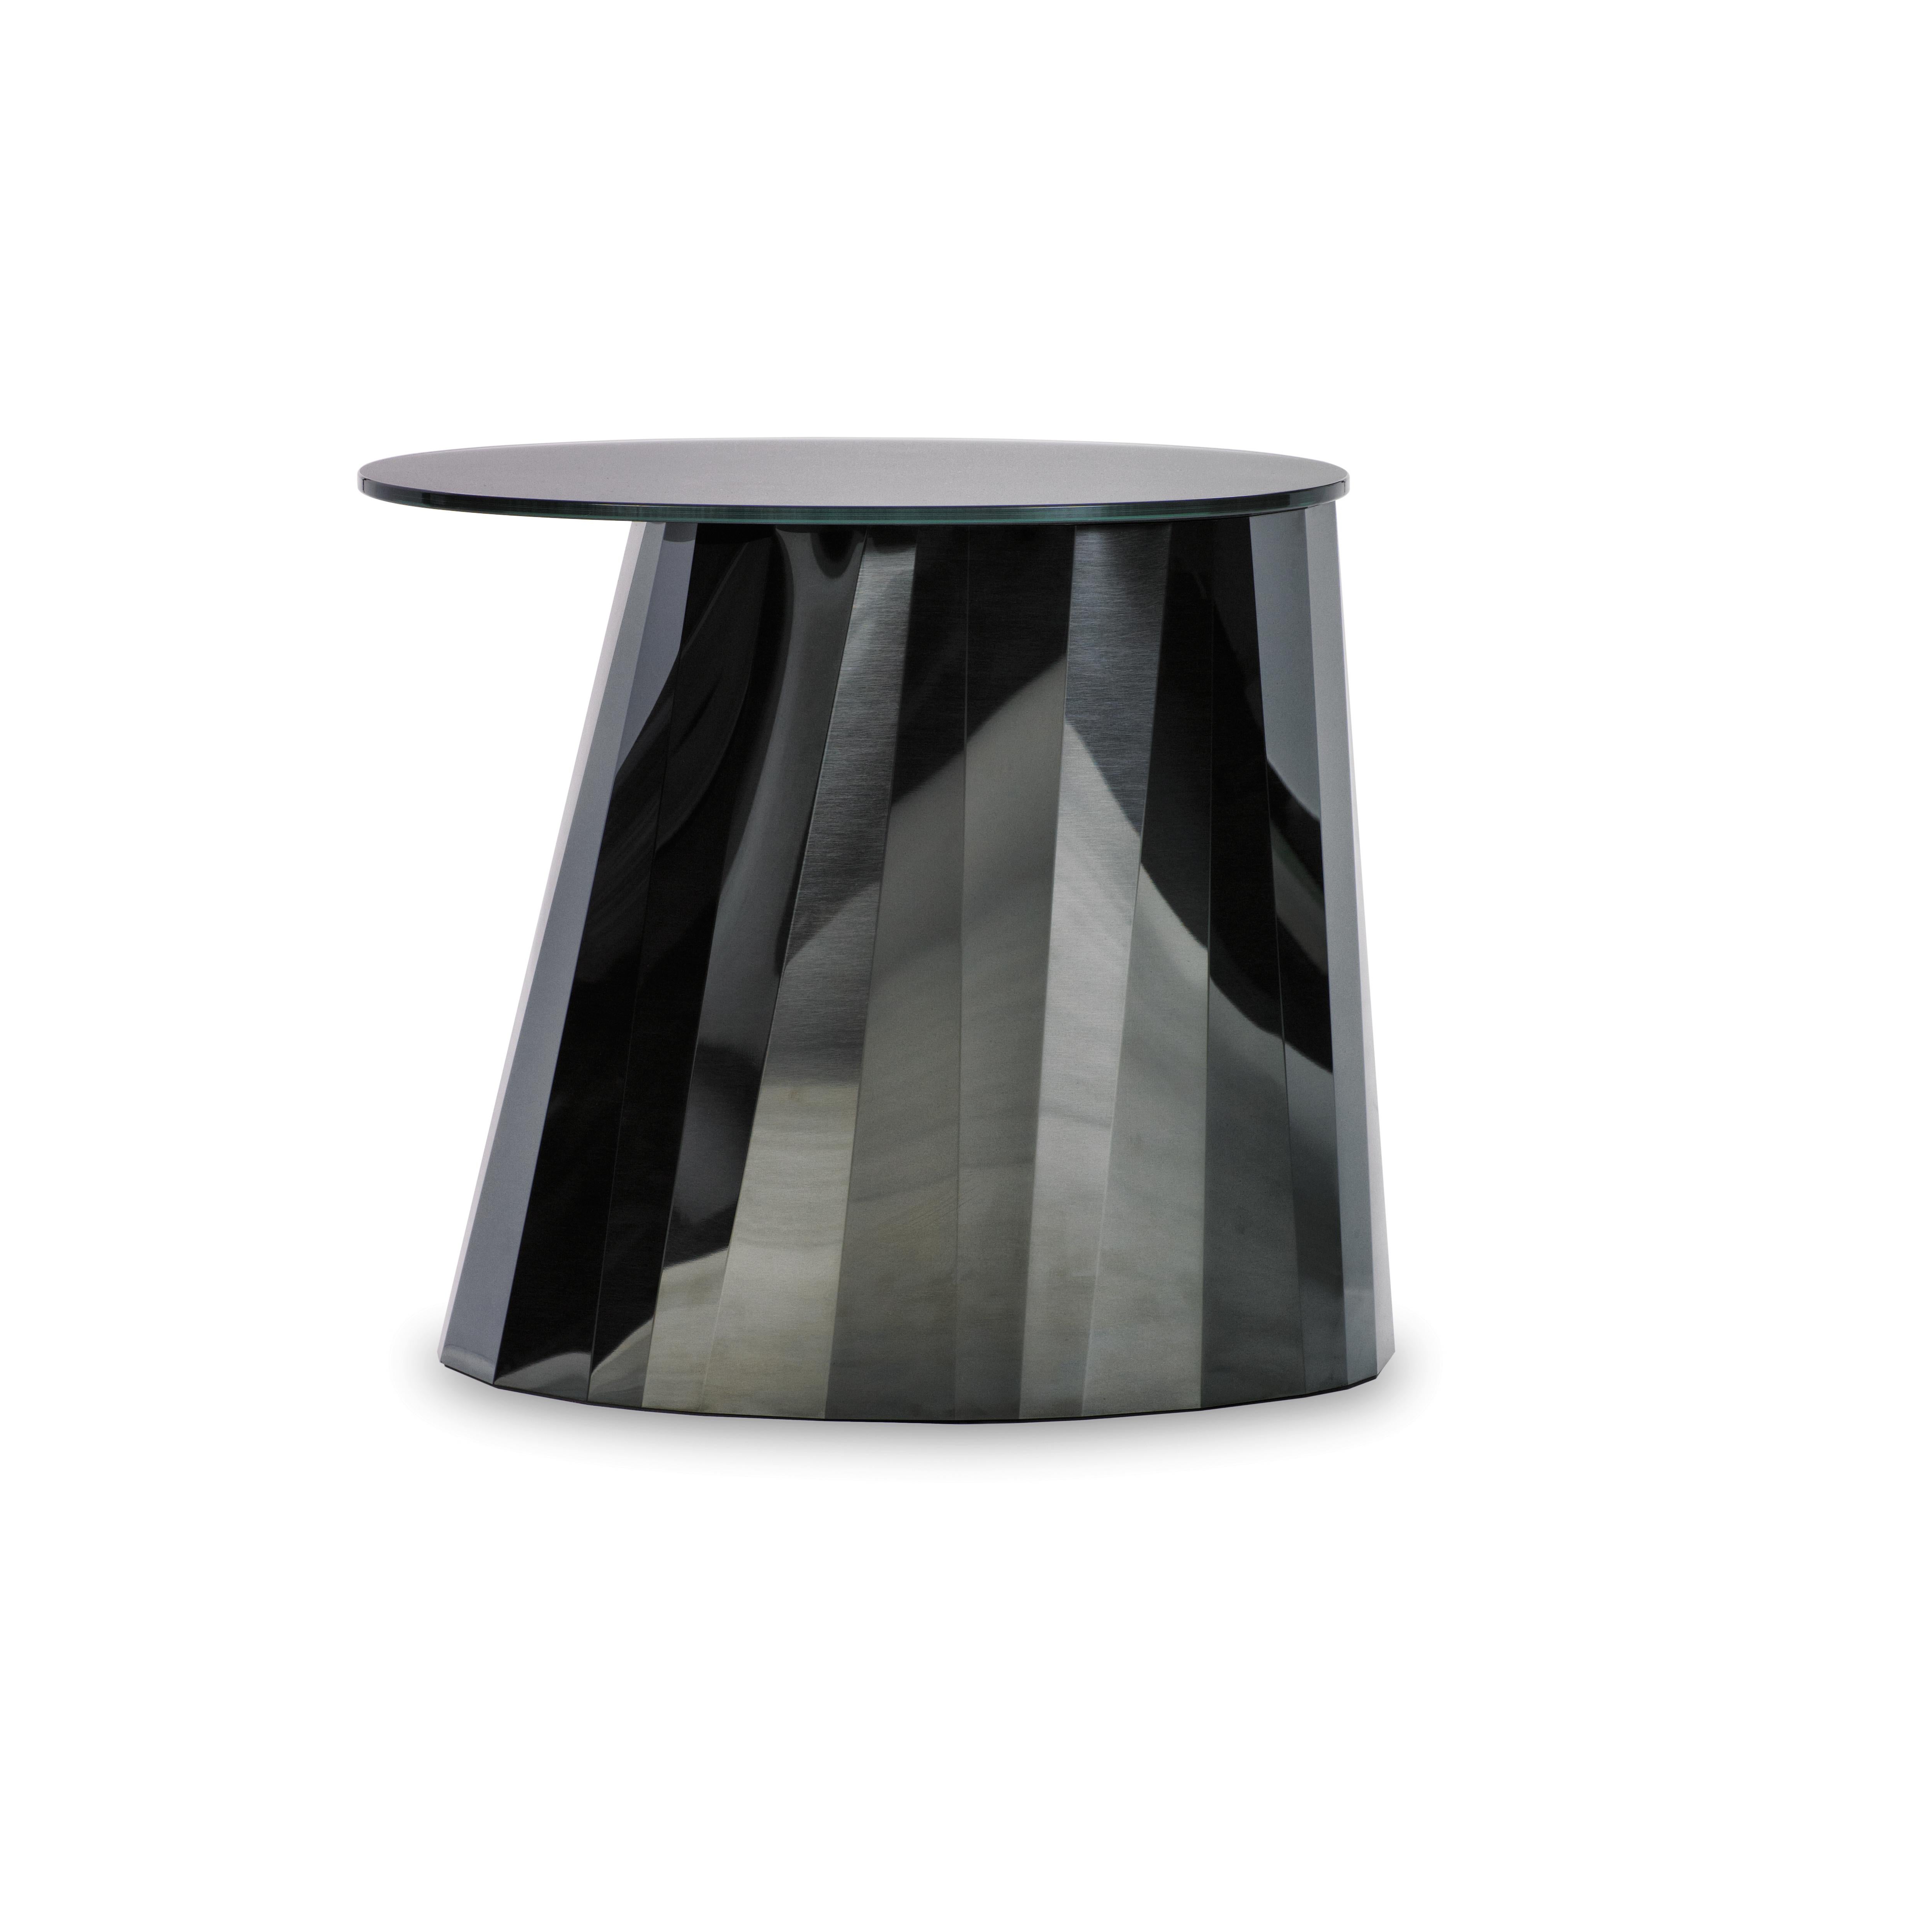 With the Pli side table series French designer Victoria Wilmotte brings objects of unusual crystalline elegance and astonishing geometry to living environments. The bends and folds that gave Pli its name almost make the stainless steel base look